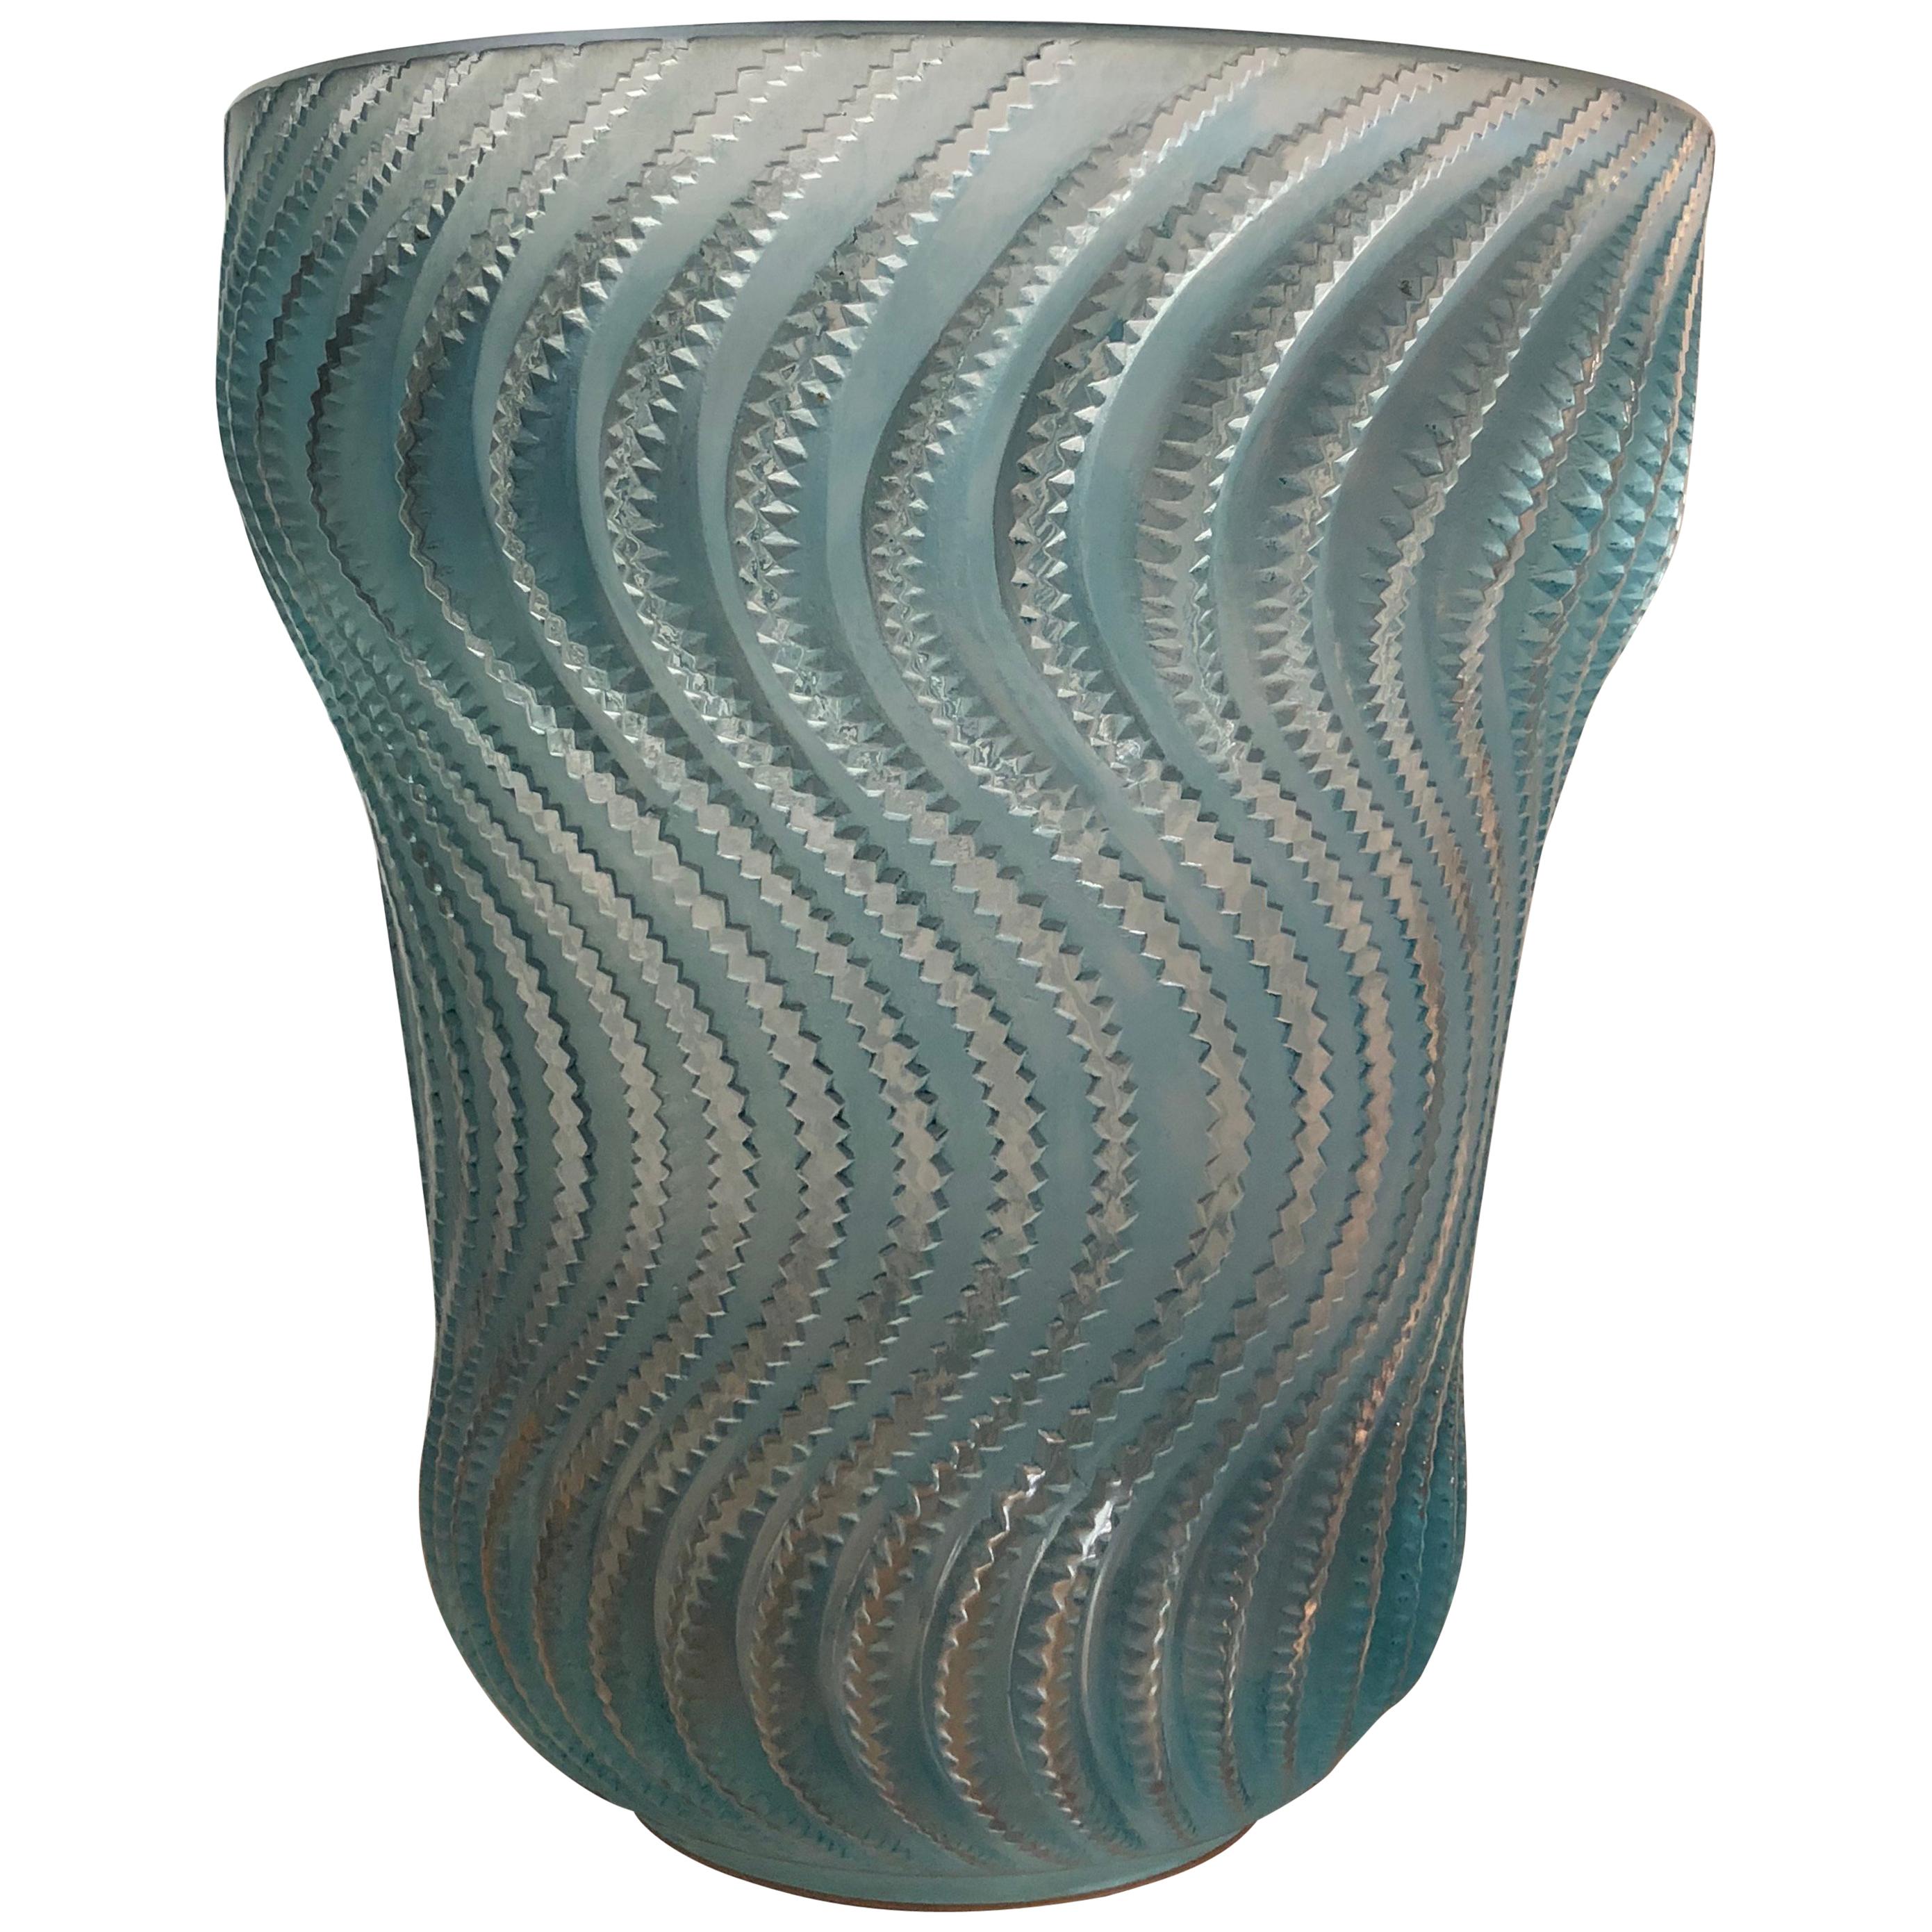 1934 René Lalique Actinia Vase in Frosted Glass with Blue Patina